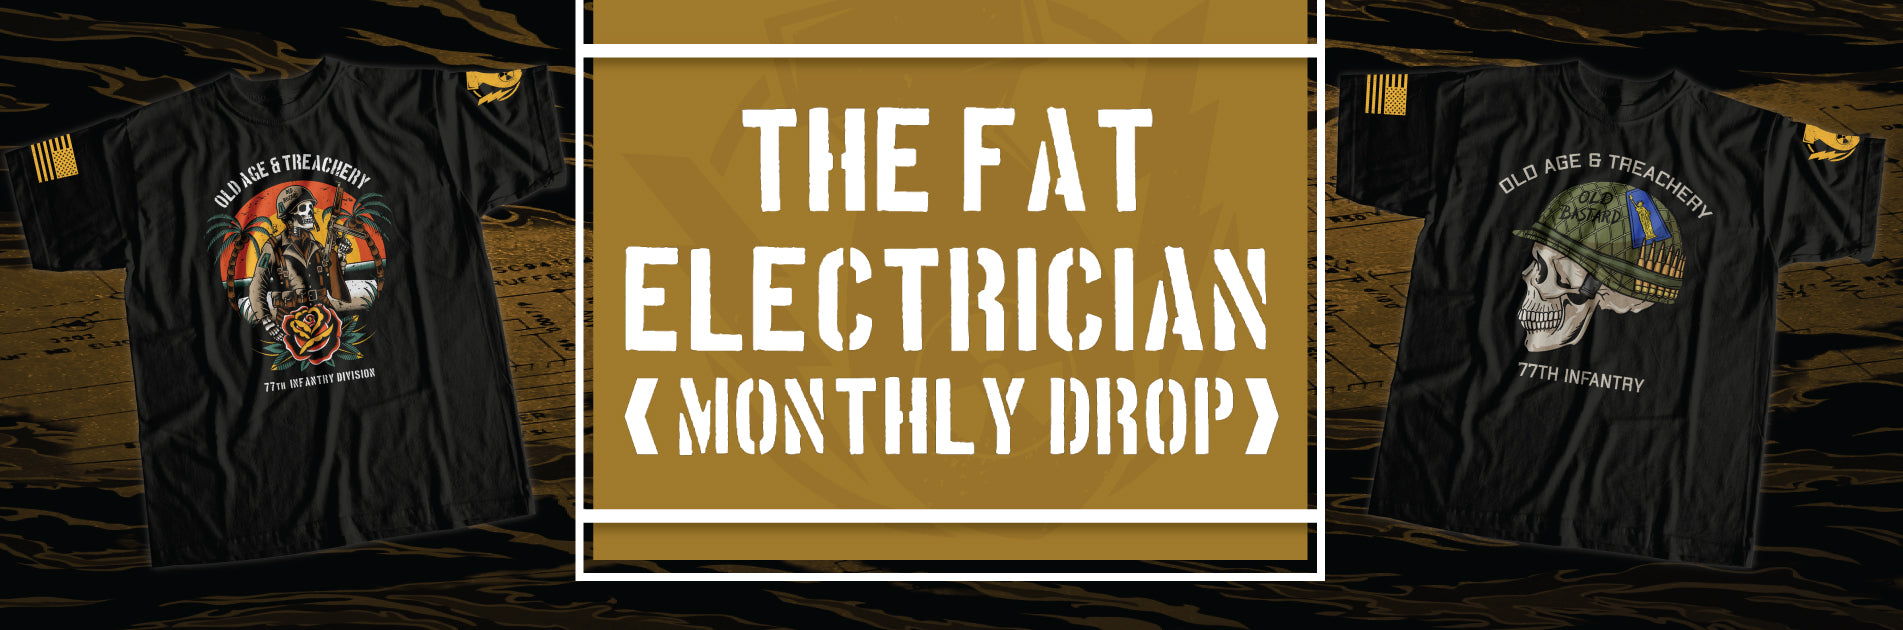 /collections/the-fat-electrician-monthly-drop-limited-releases